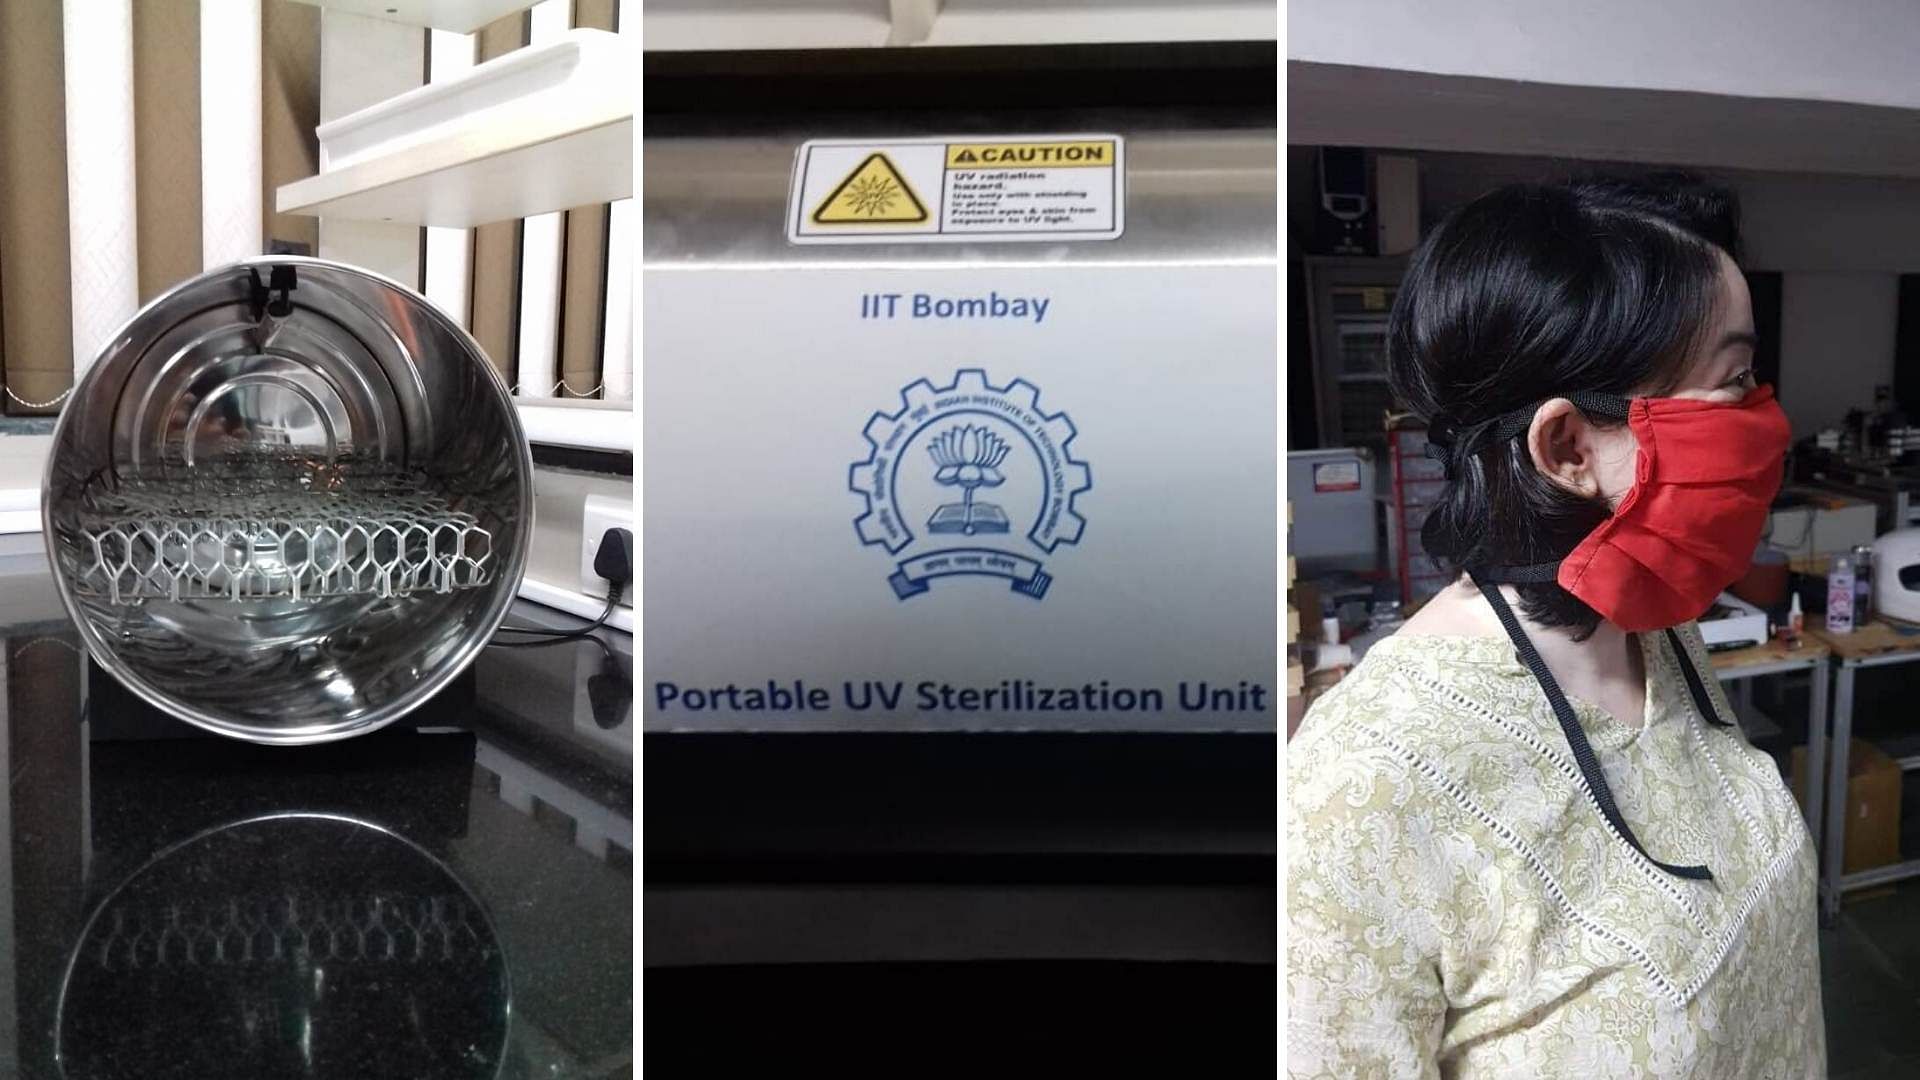 The UV sanitiser an cotton masks innovated by IIT Bombay.